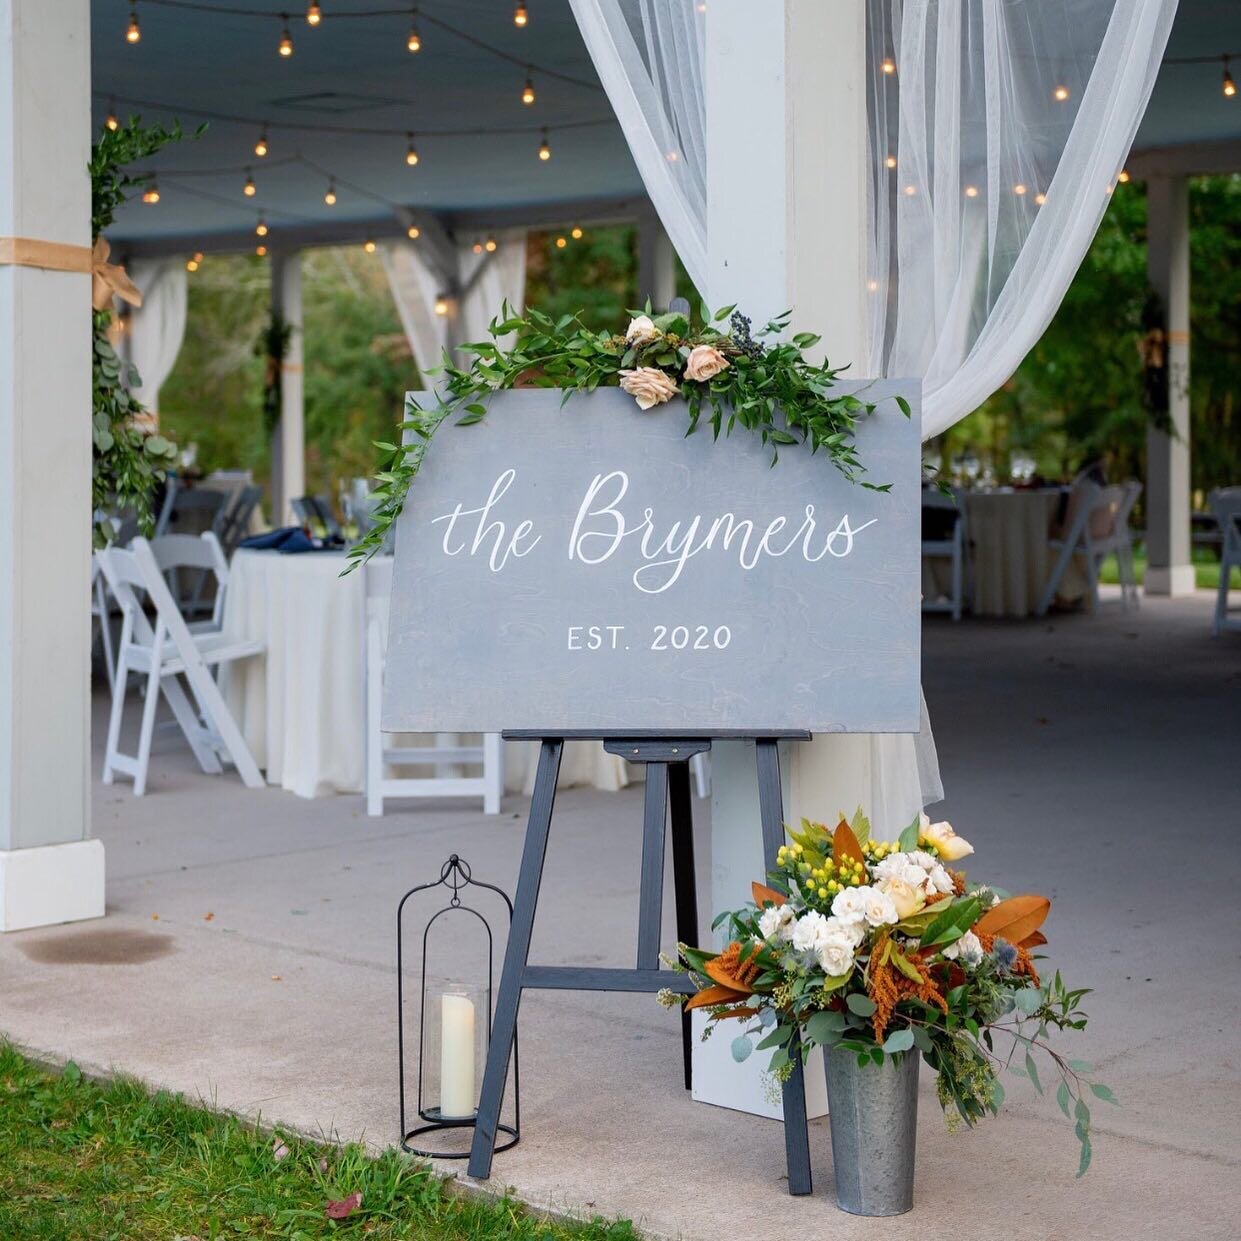 Love the idea of renting, but also want a keepsake from your big day? This Welcome Sign doubles as home decor after the wedding 👏🏻
.
✨ Custom Keepsake Sign ✨
.
.
#weddingsignage #weddingsign #mawedding #northshorema #handmadesigns #bostonweddings #